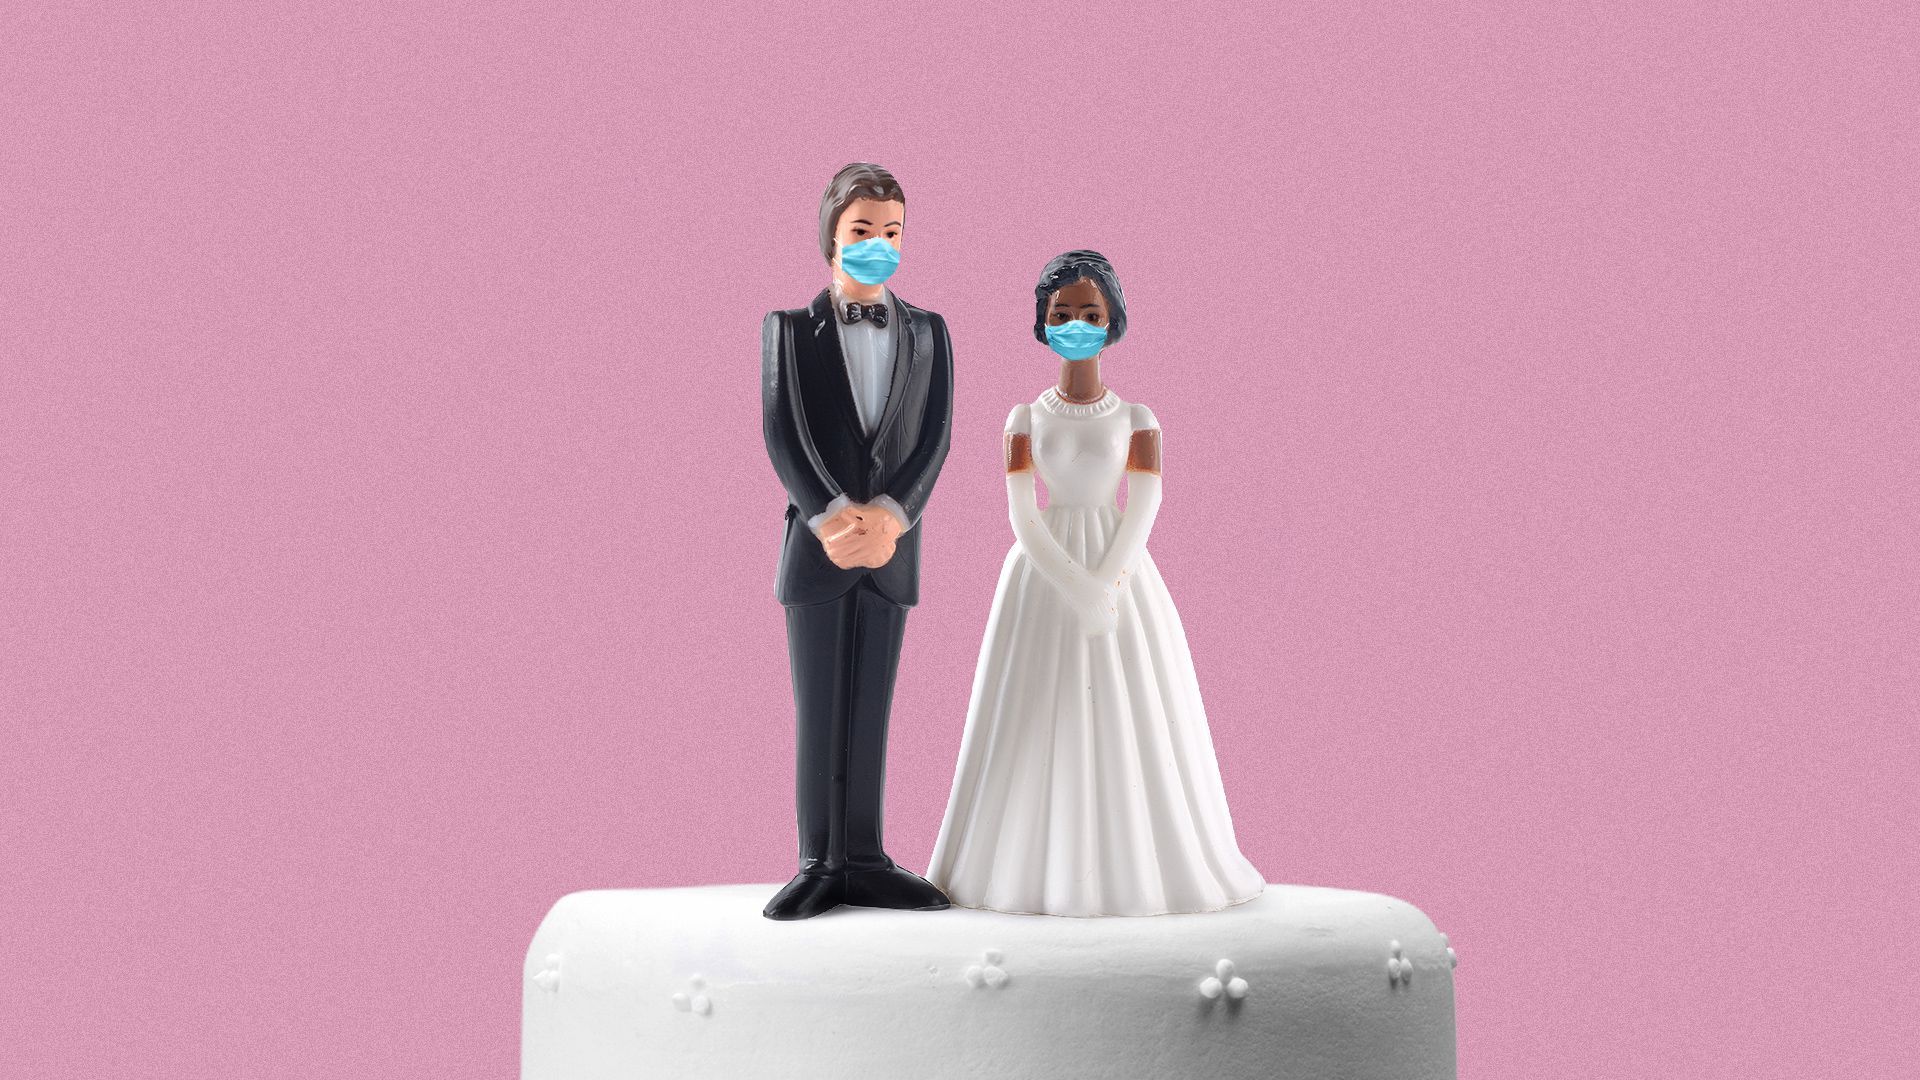 Illustration of the top of a wedding cake with the bride and groom figurines wearing surgical masks. 